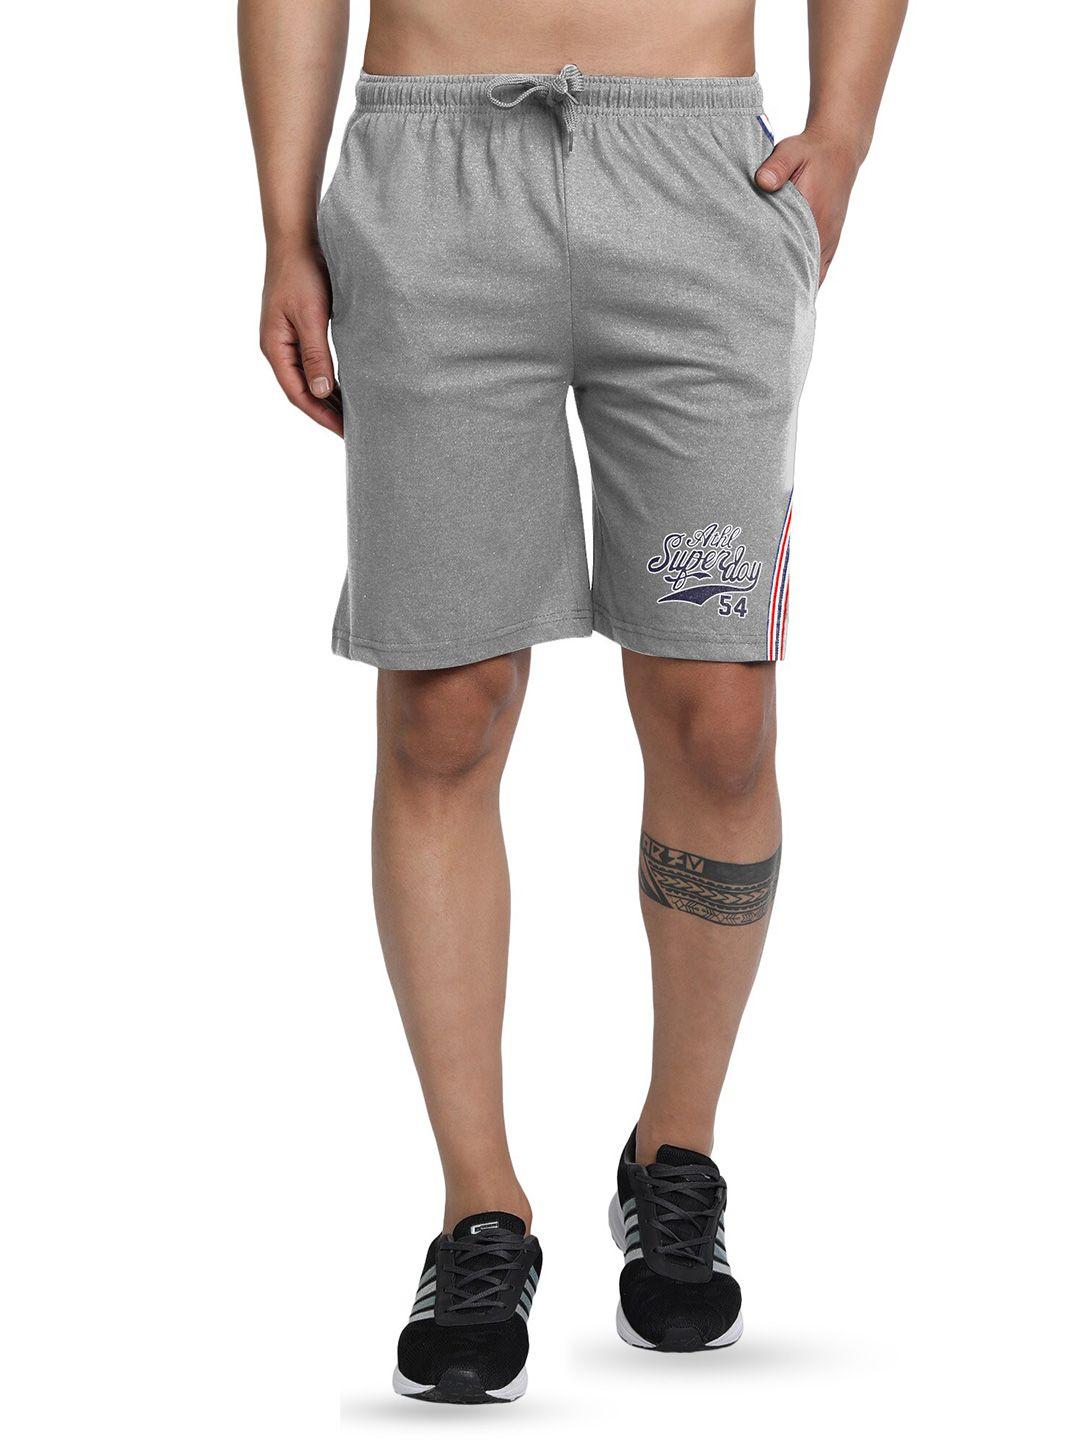 ftx-men-mid-rise-typography-printed-shorts